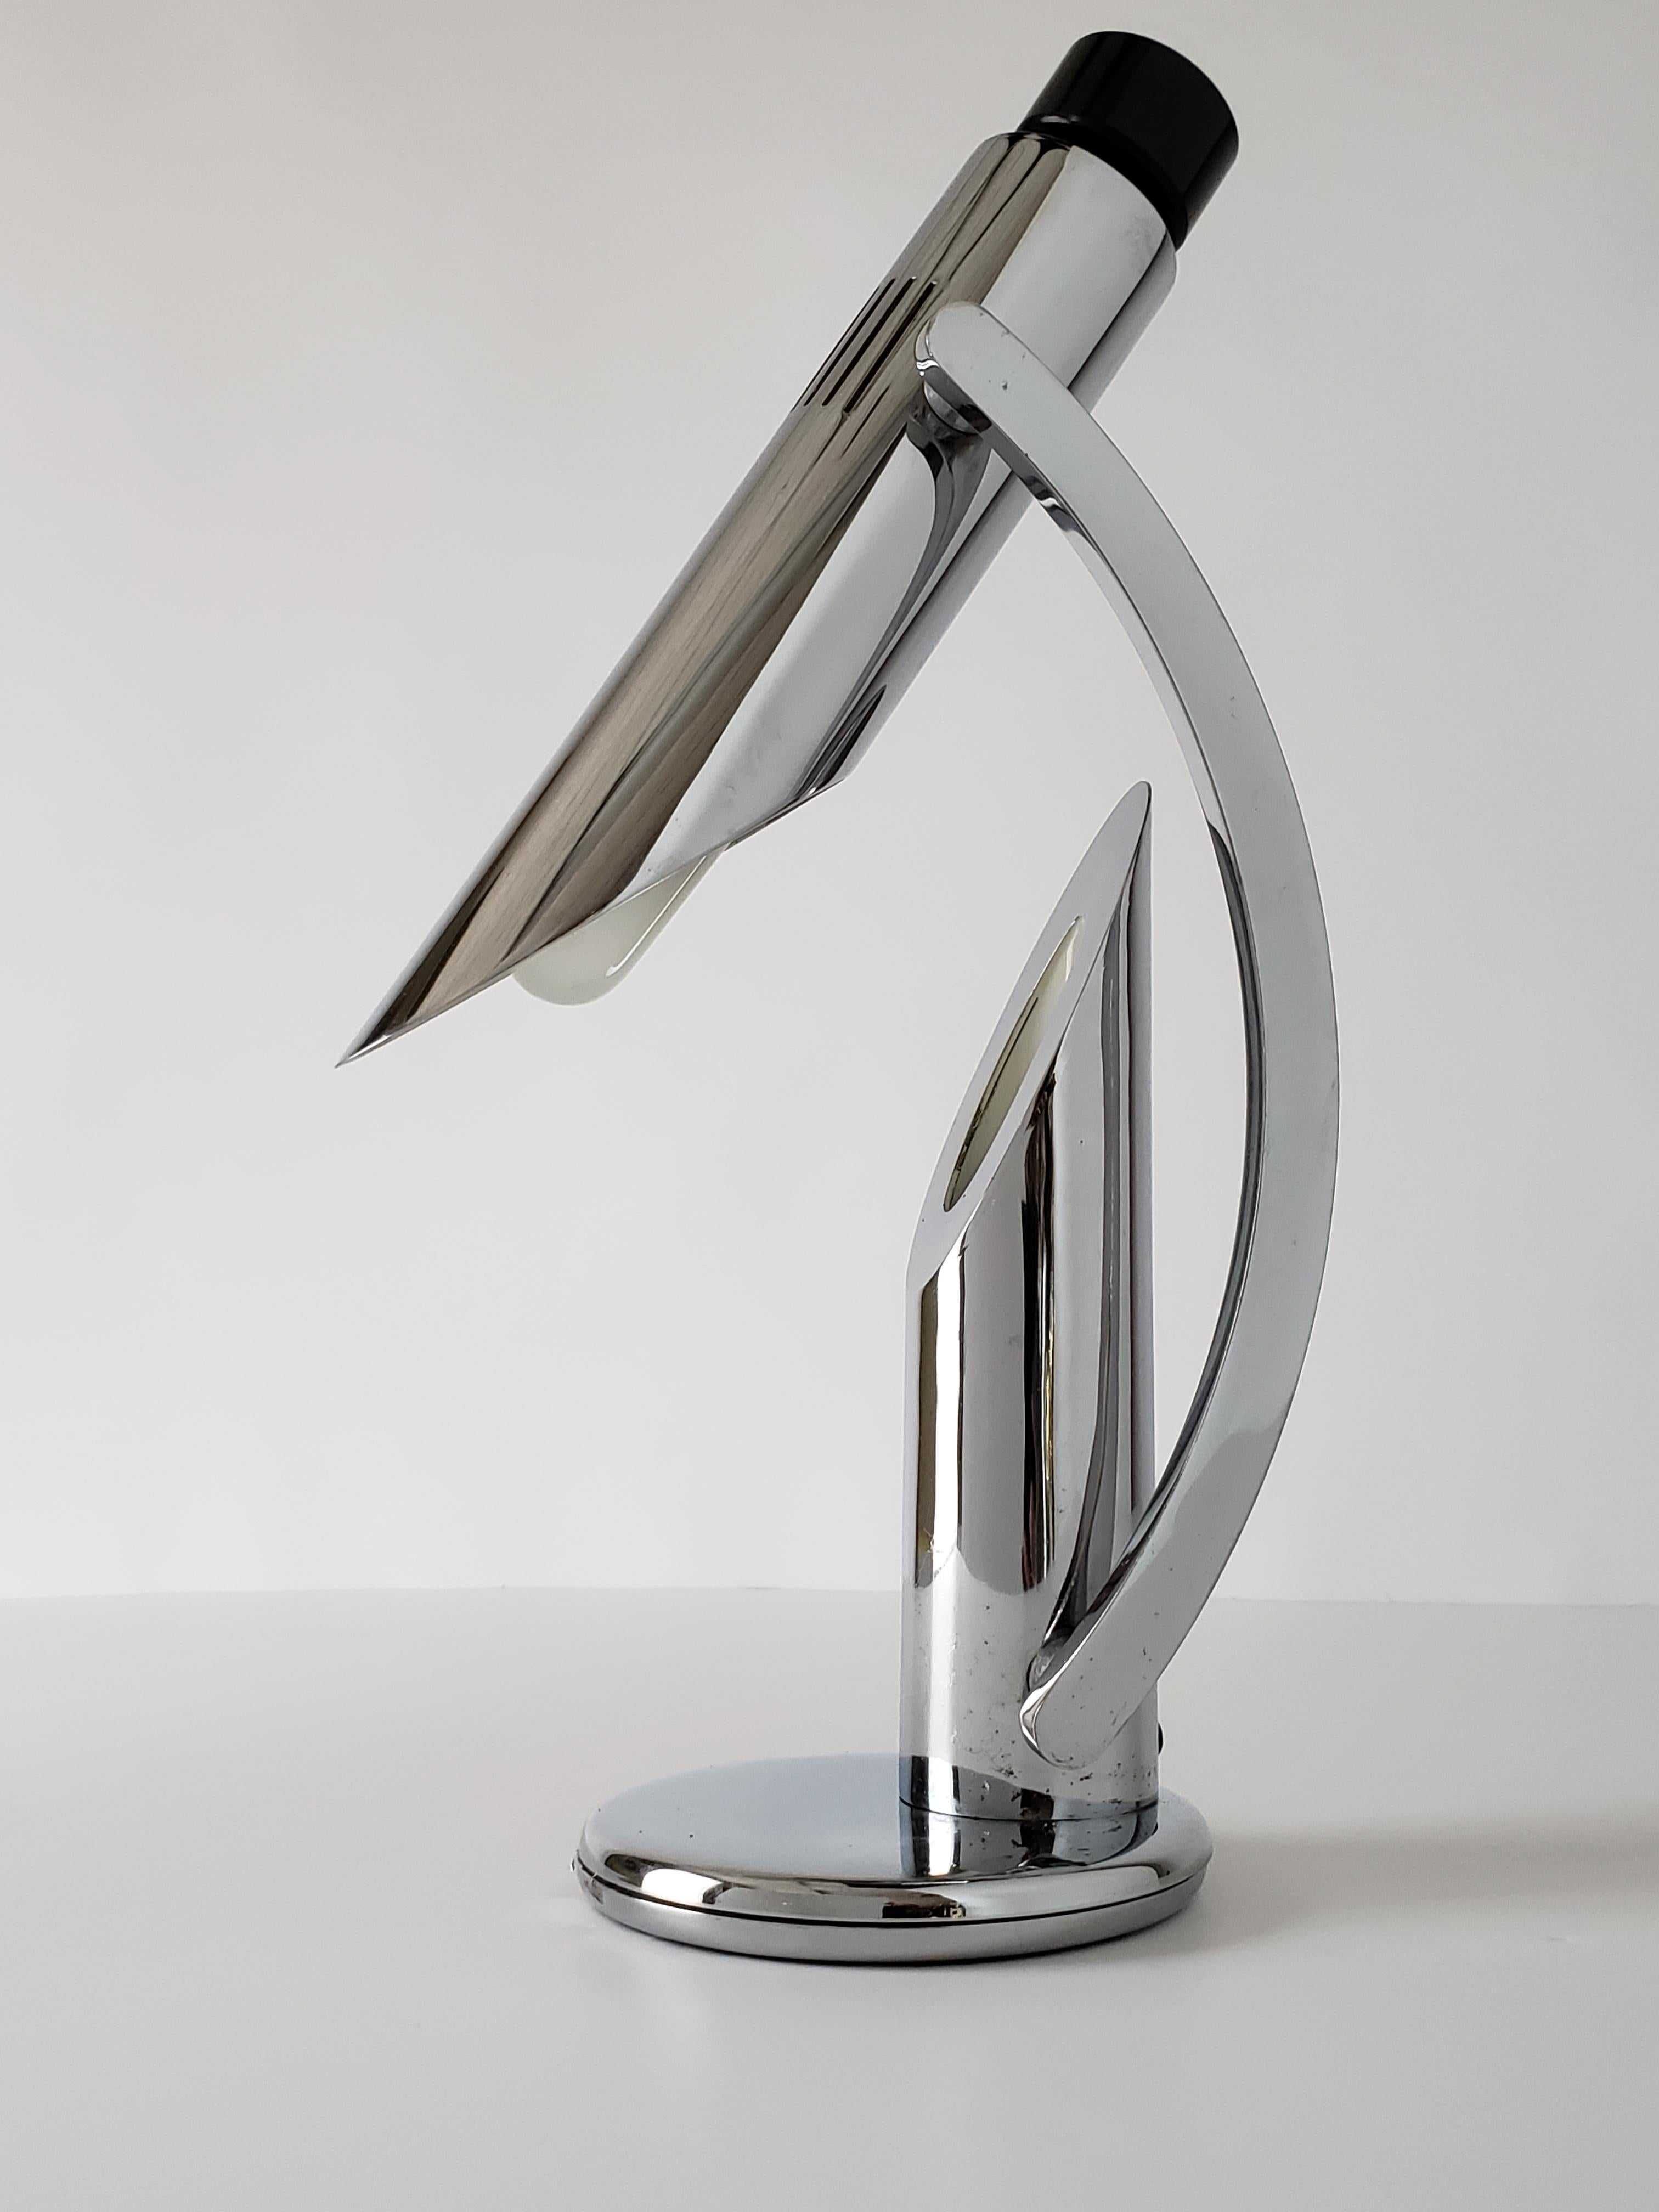 Fase chrome table or desk lamp with articulated, foldable arm.

Shade measure 12.5 inches long.

Black top is made of Bakelite.

Prime quality material, strong strudy arm movement and construction. 

Contain one E26 size socket rated at 40